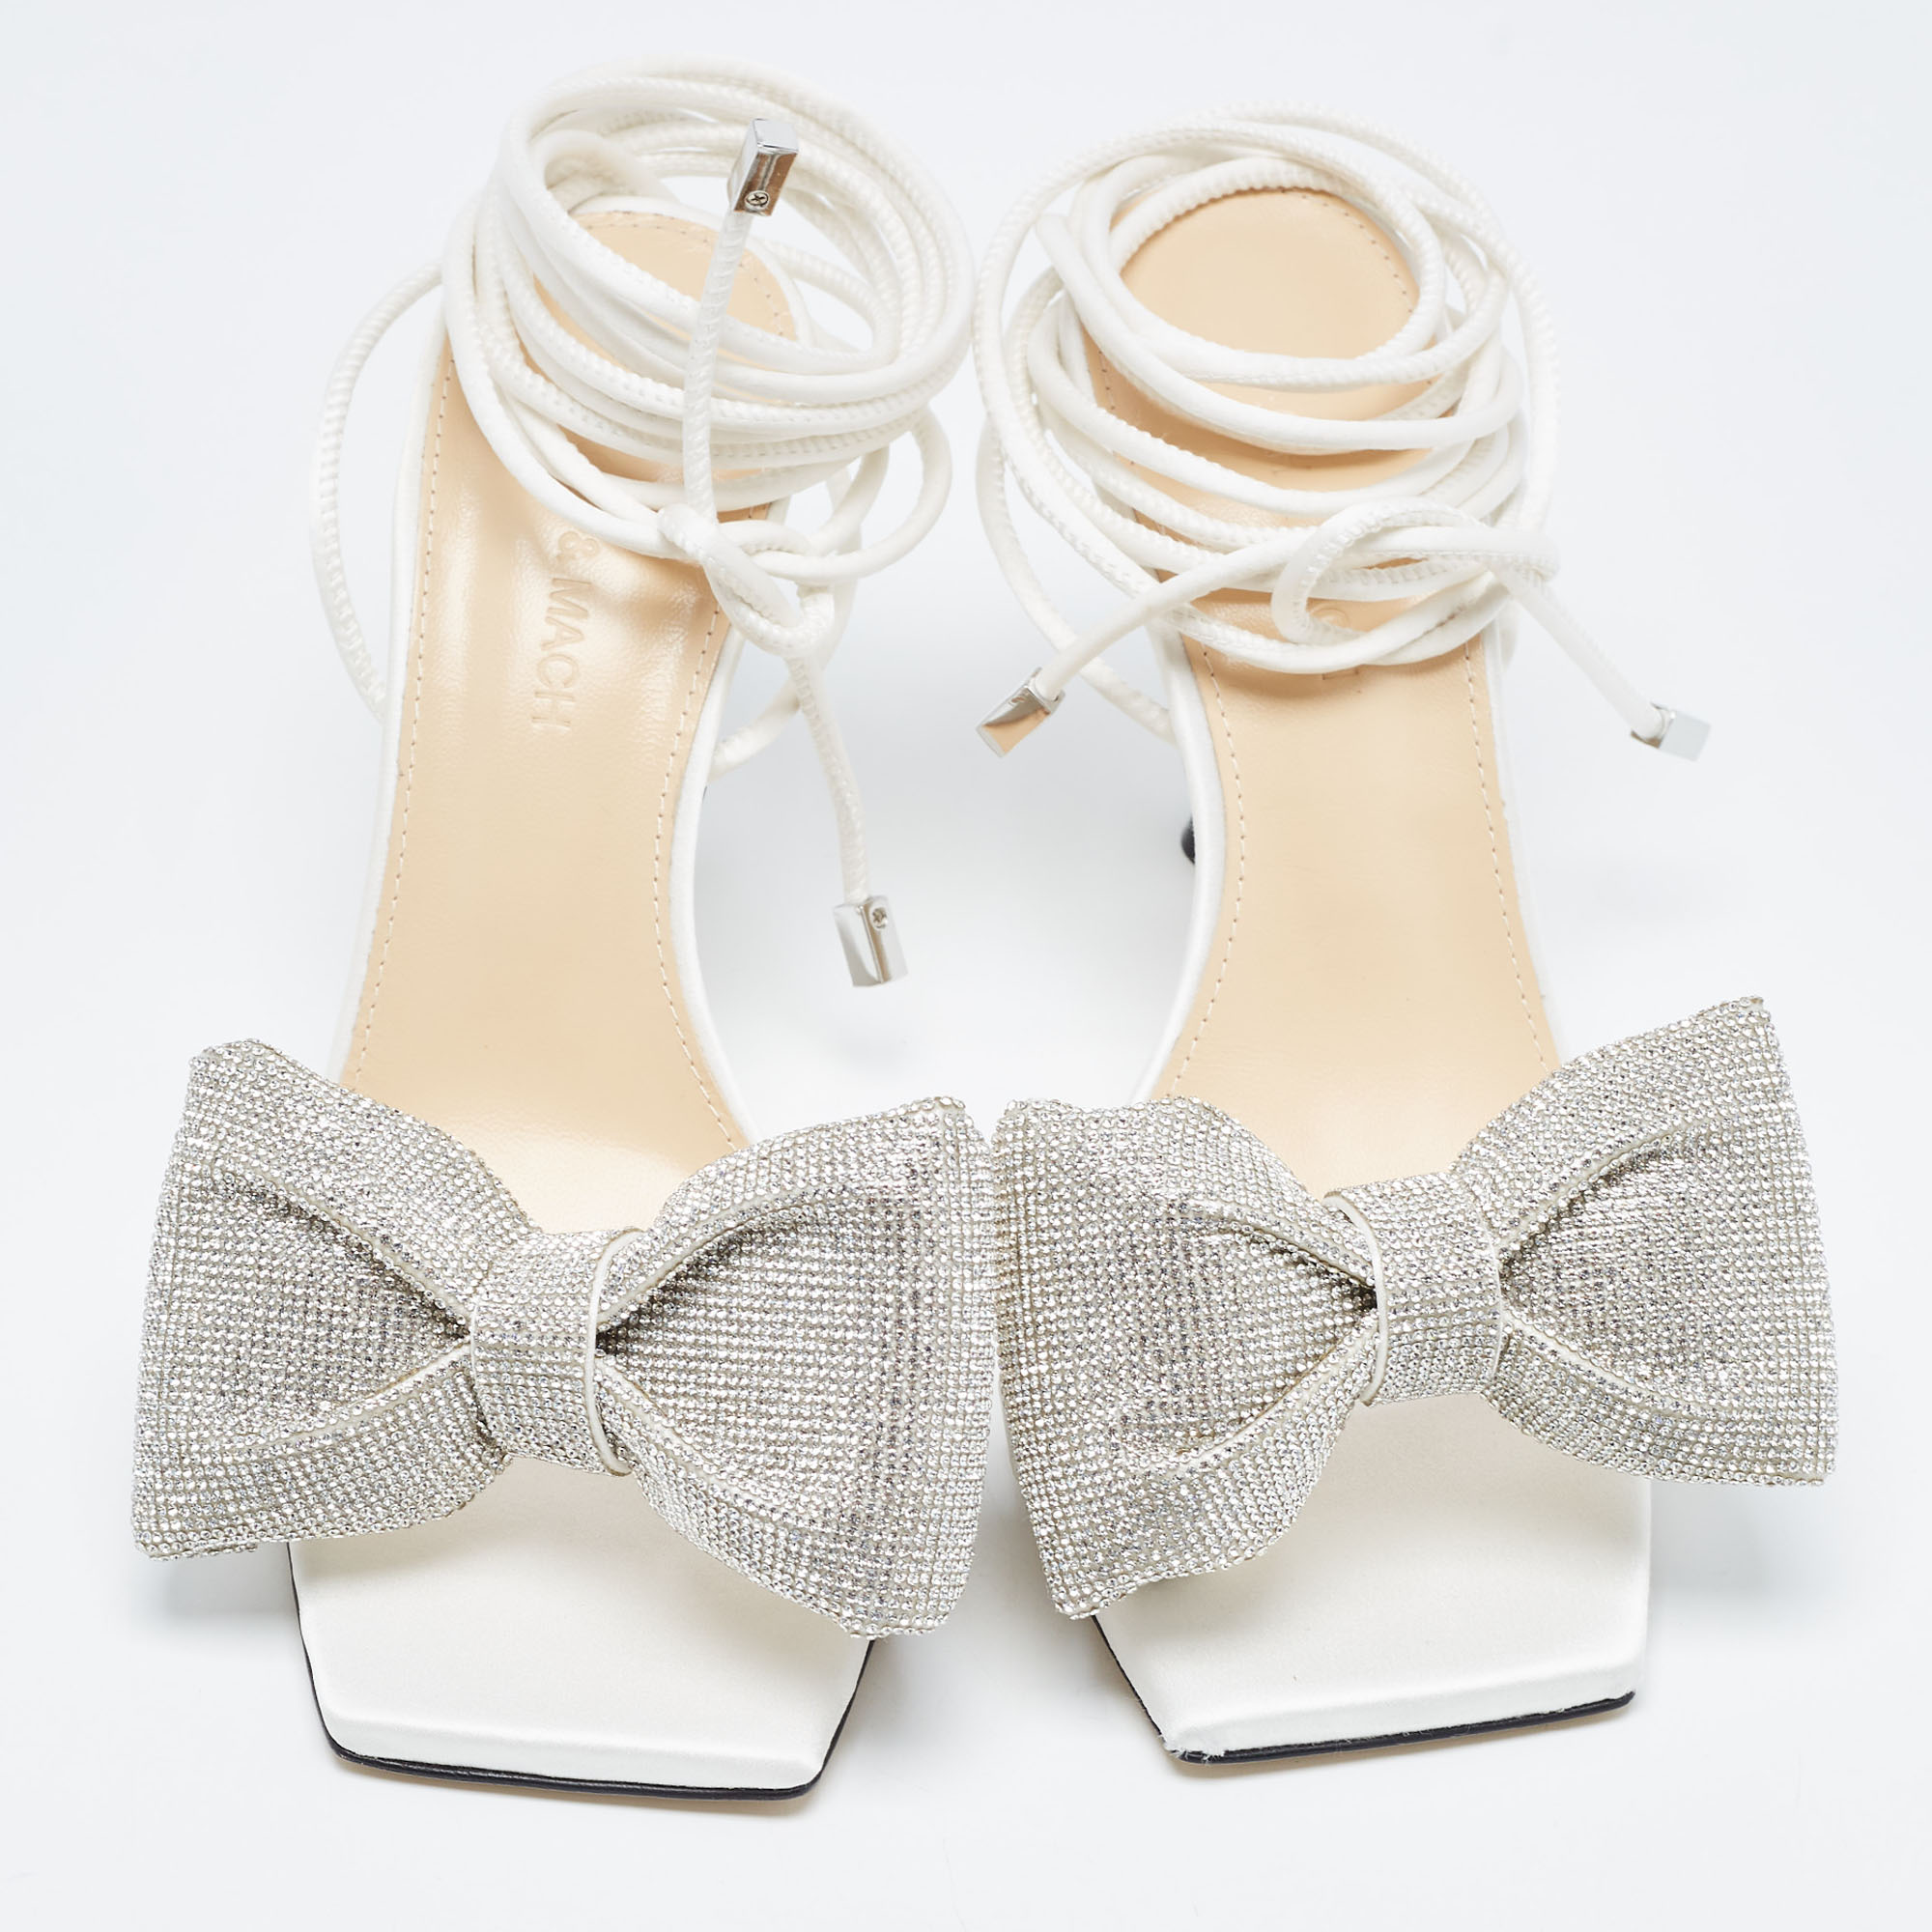 Mach & Mach White Satin Crystal Embellished Bow Ankle Wrap Sandals Size 38